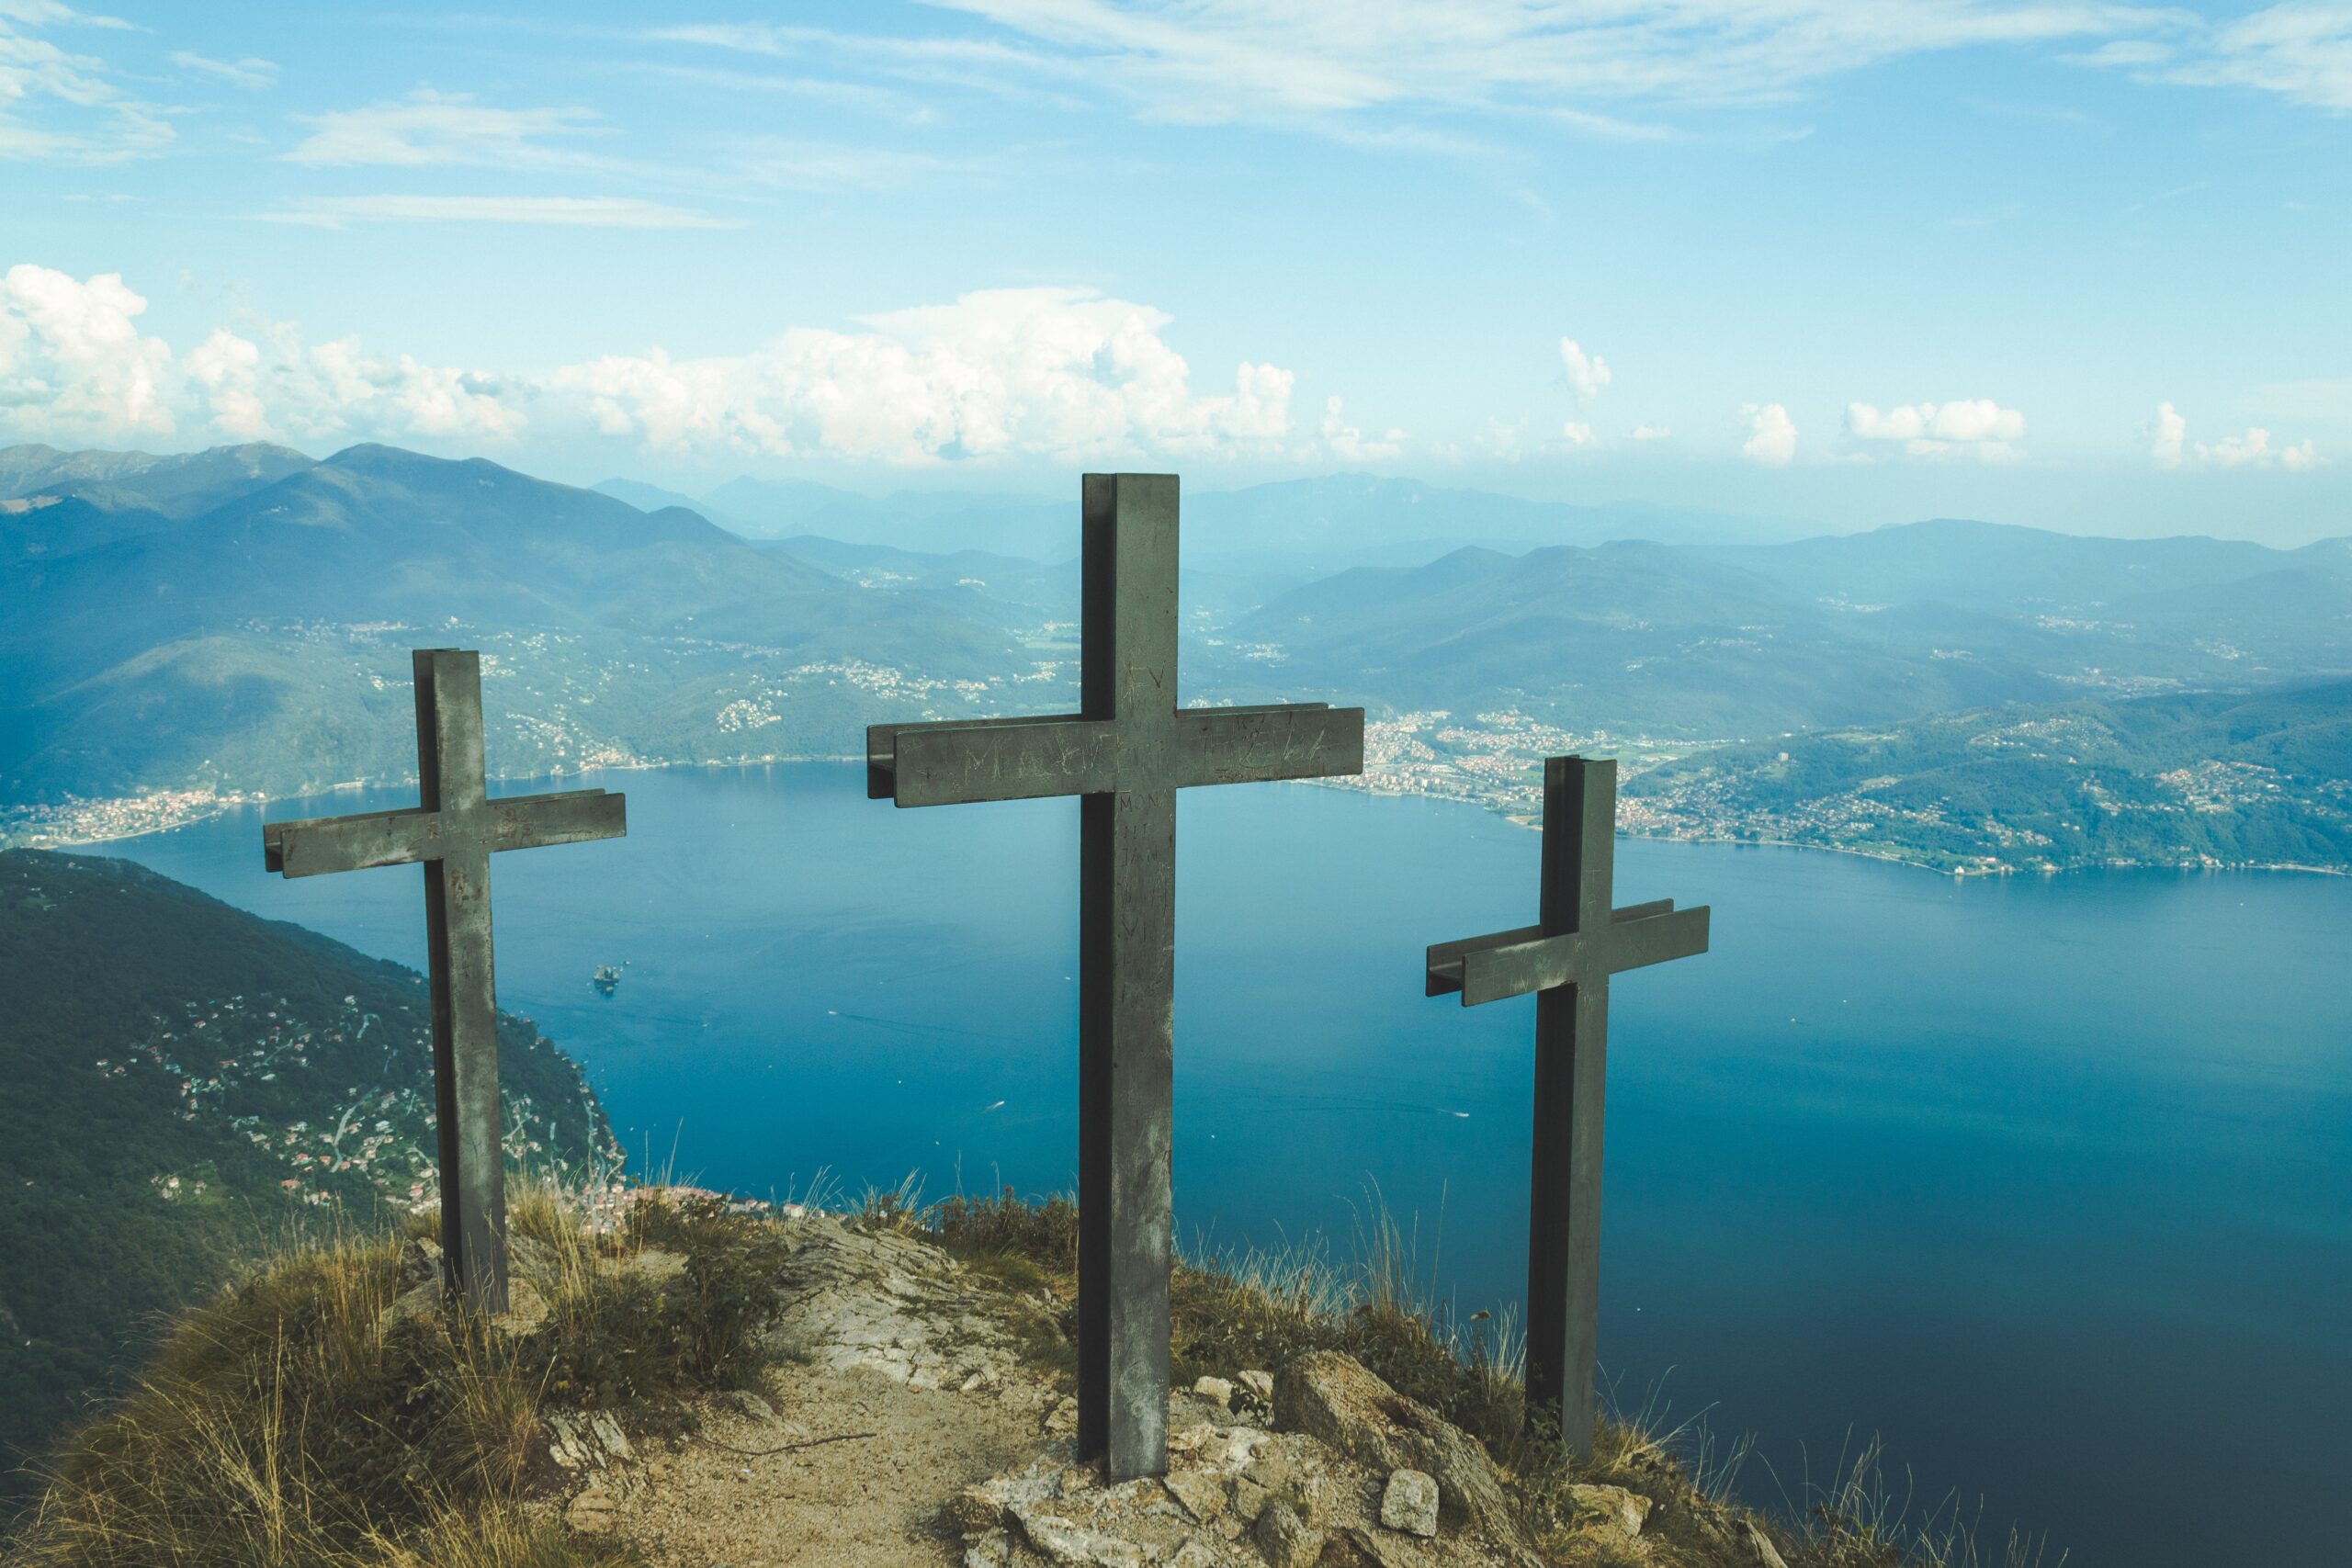 How Does The Story Of The Crucifixion And Resurrection Of Jesus Teach Us About Sacrifice And Salvation?